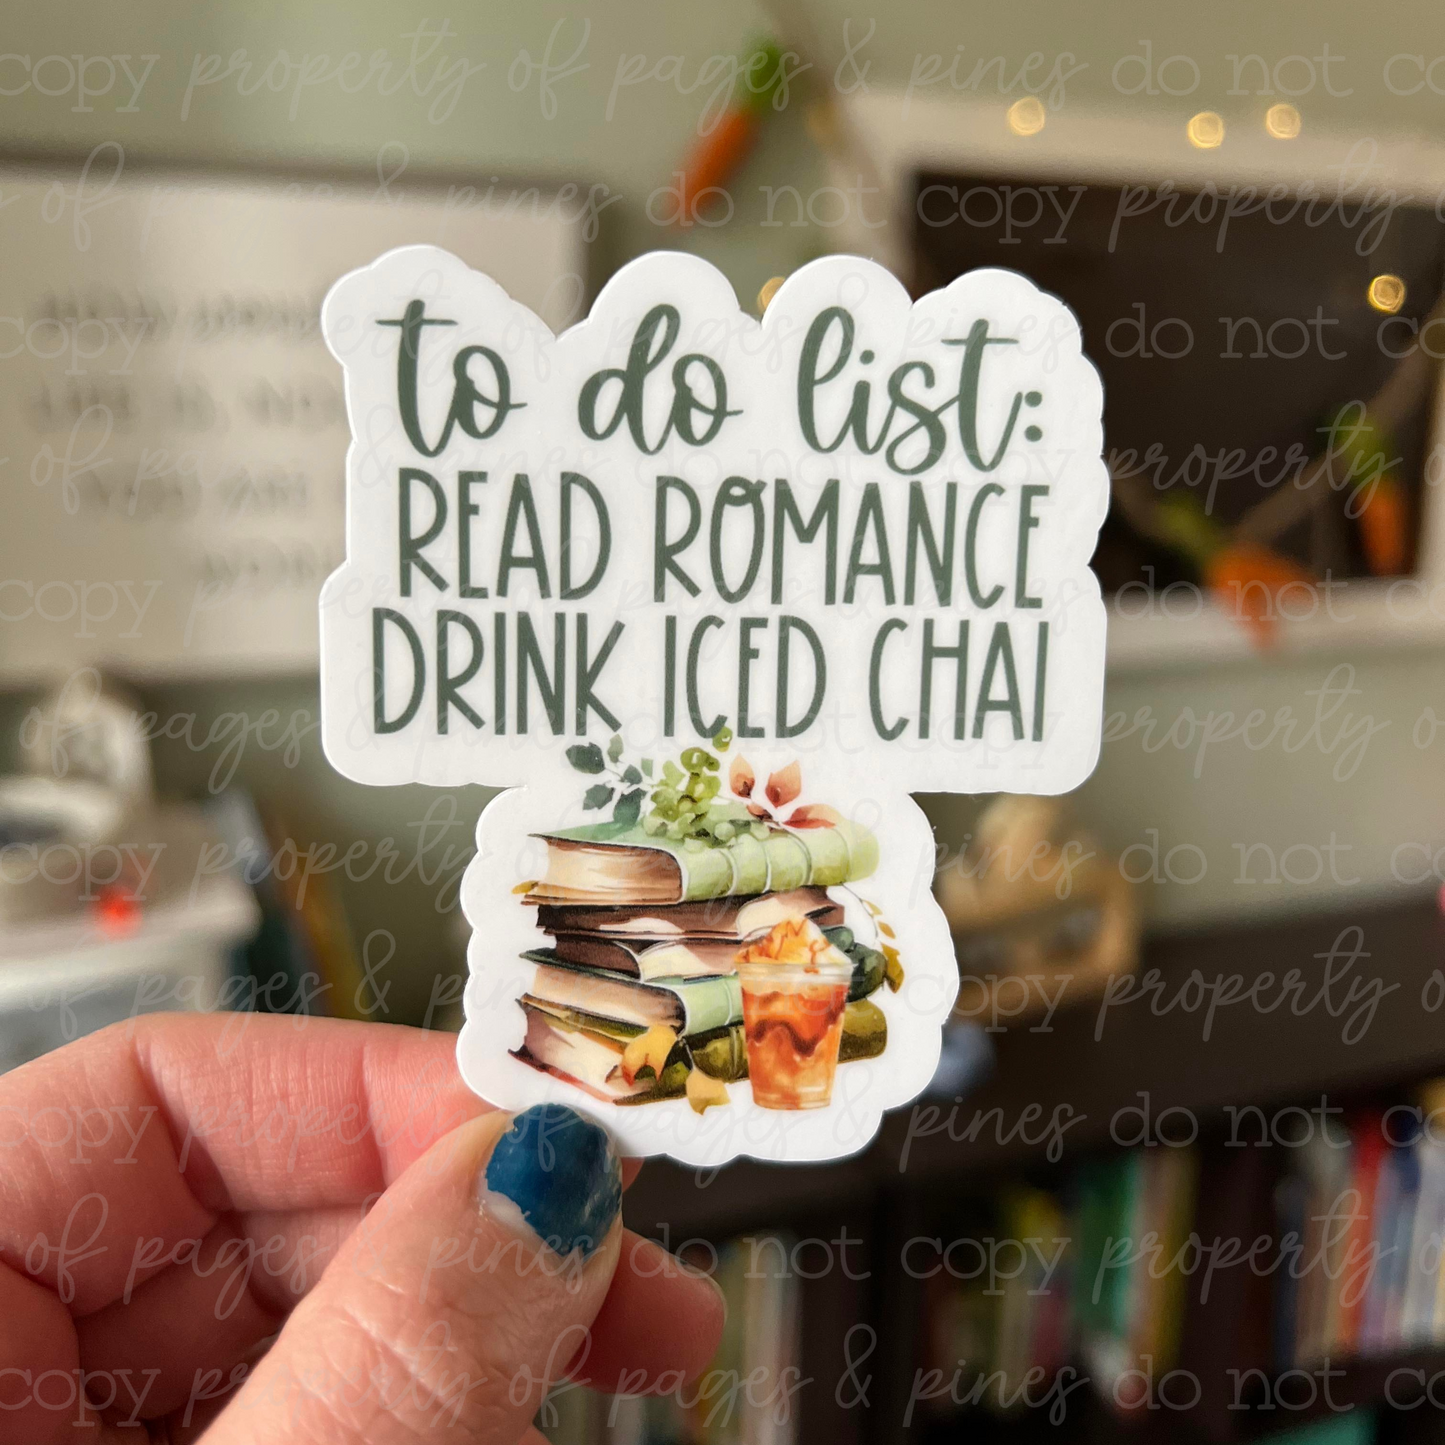 Read Romance and Drink Iced Chai